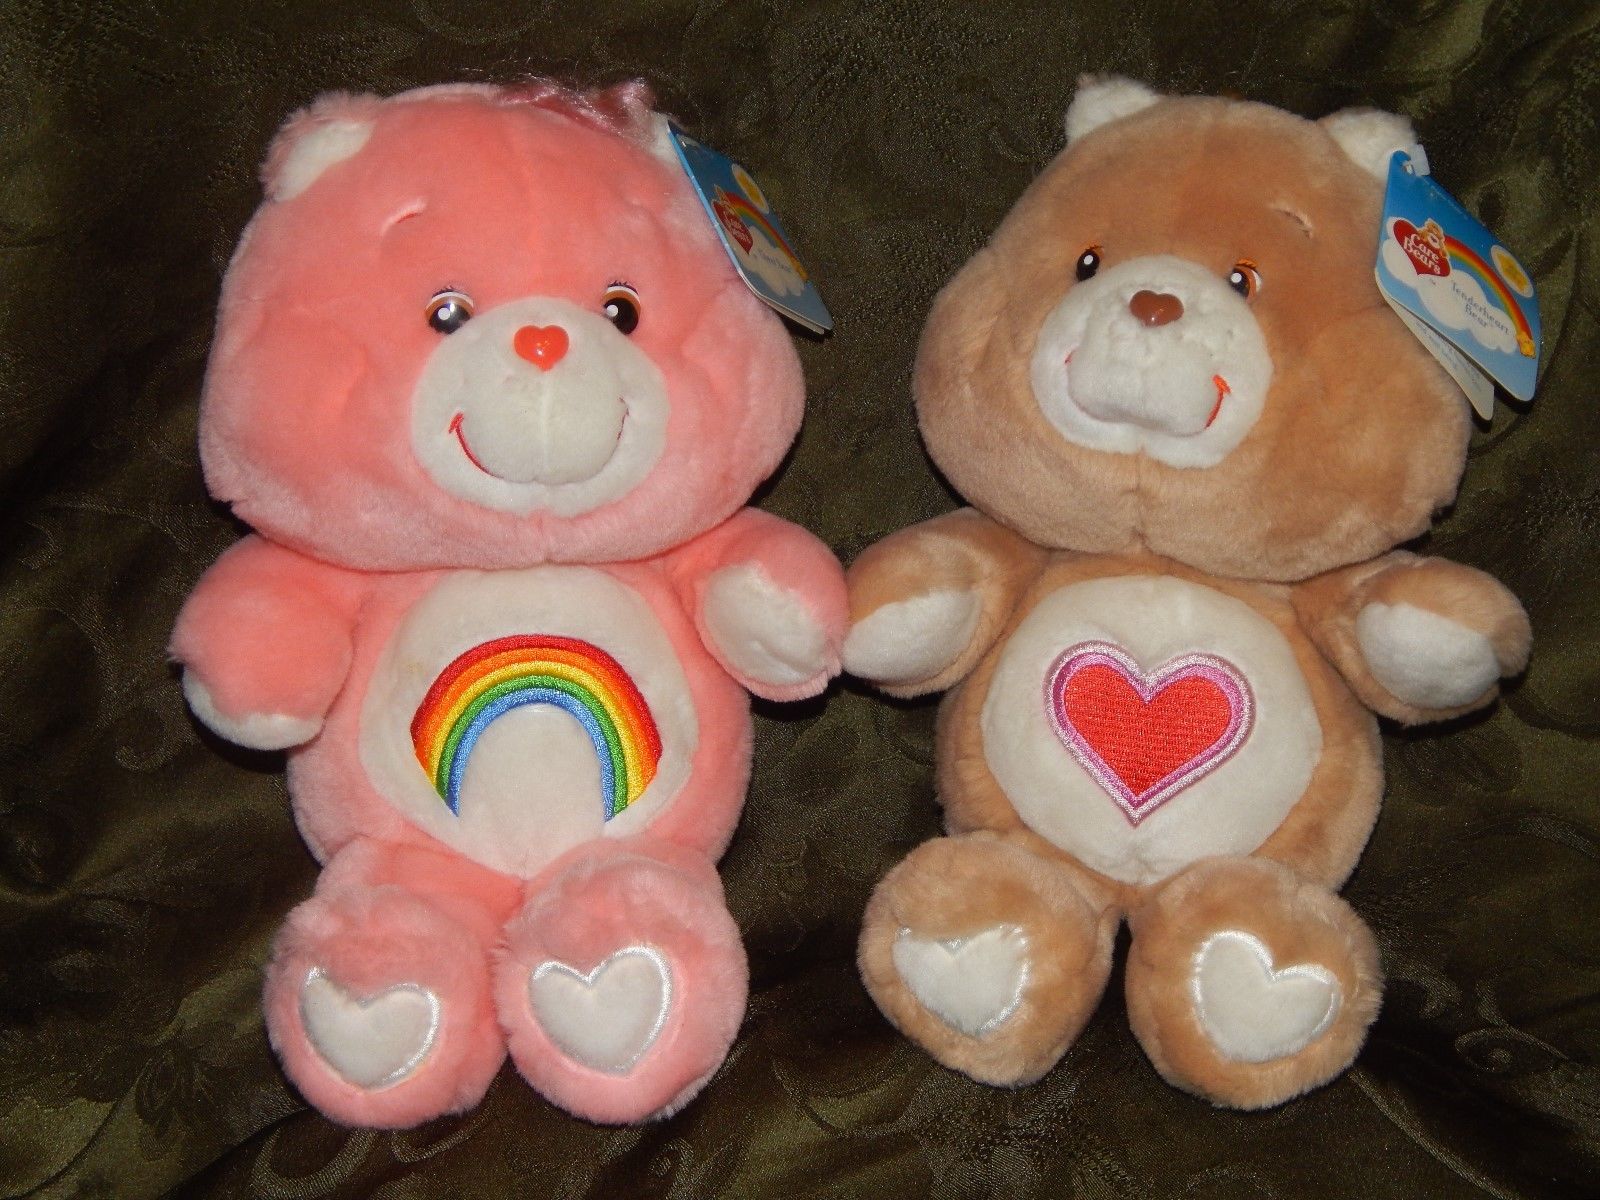 2 - 20TH ANNIVERSARY 13 INCH CARE BEARS - CHEER + TENDERHEART - PREOWNED W TAGS